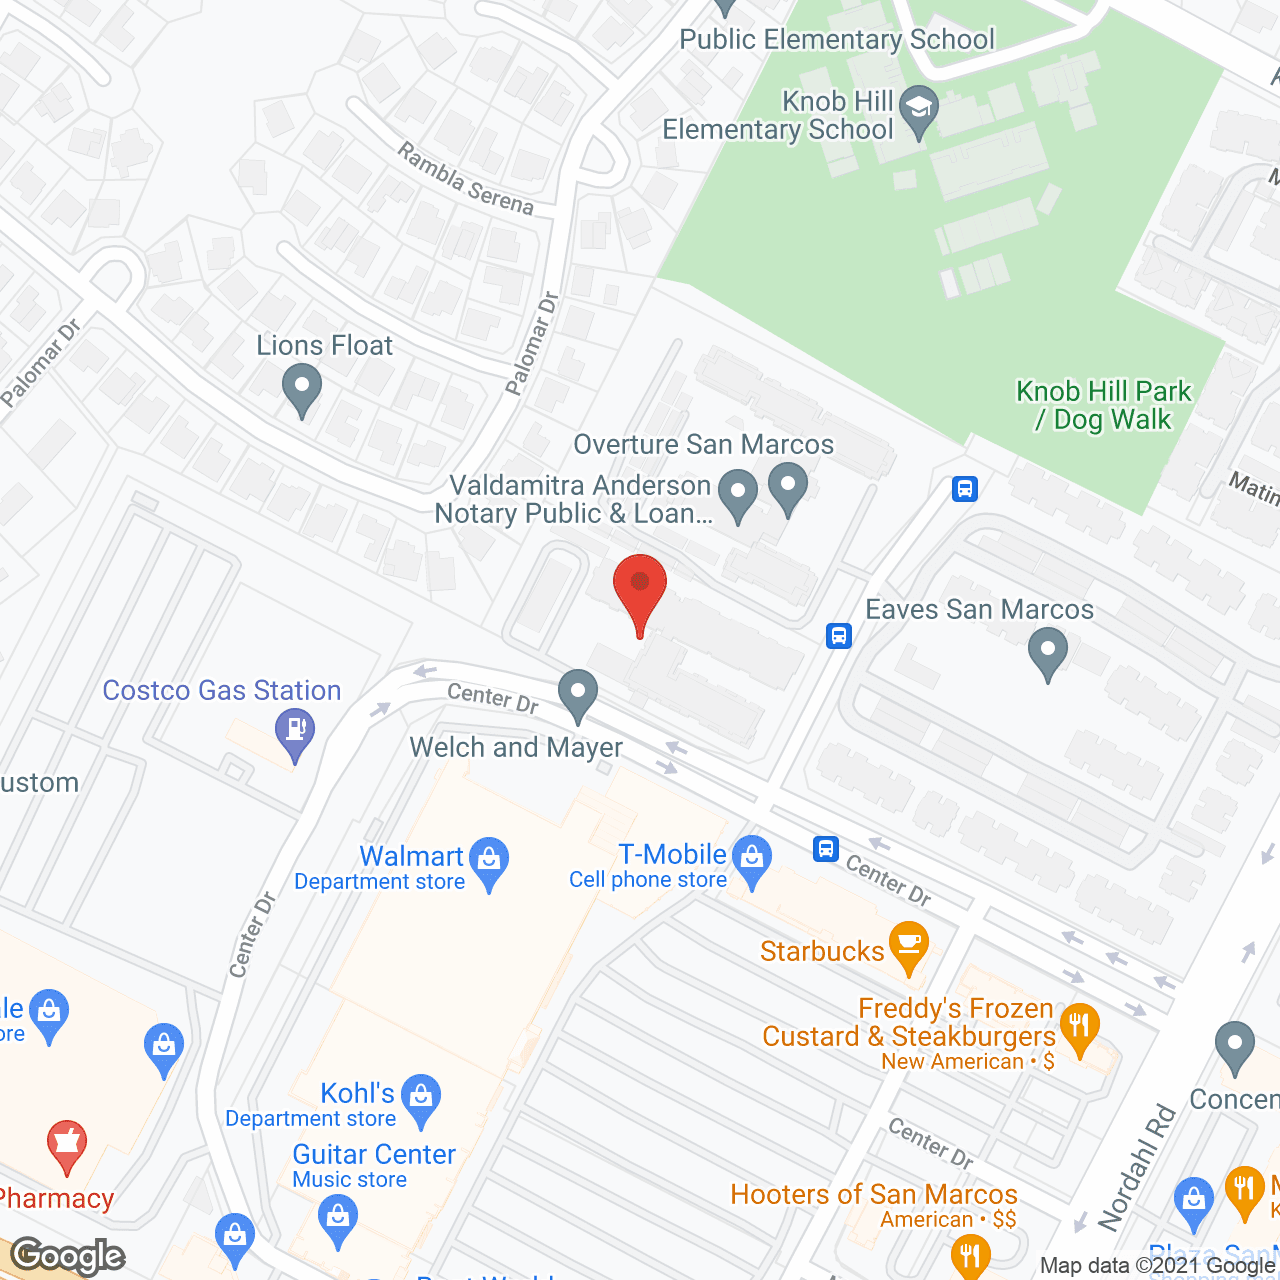 Overture of San Marcos 55+ Apartment Homes in google map